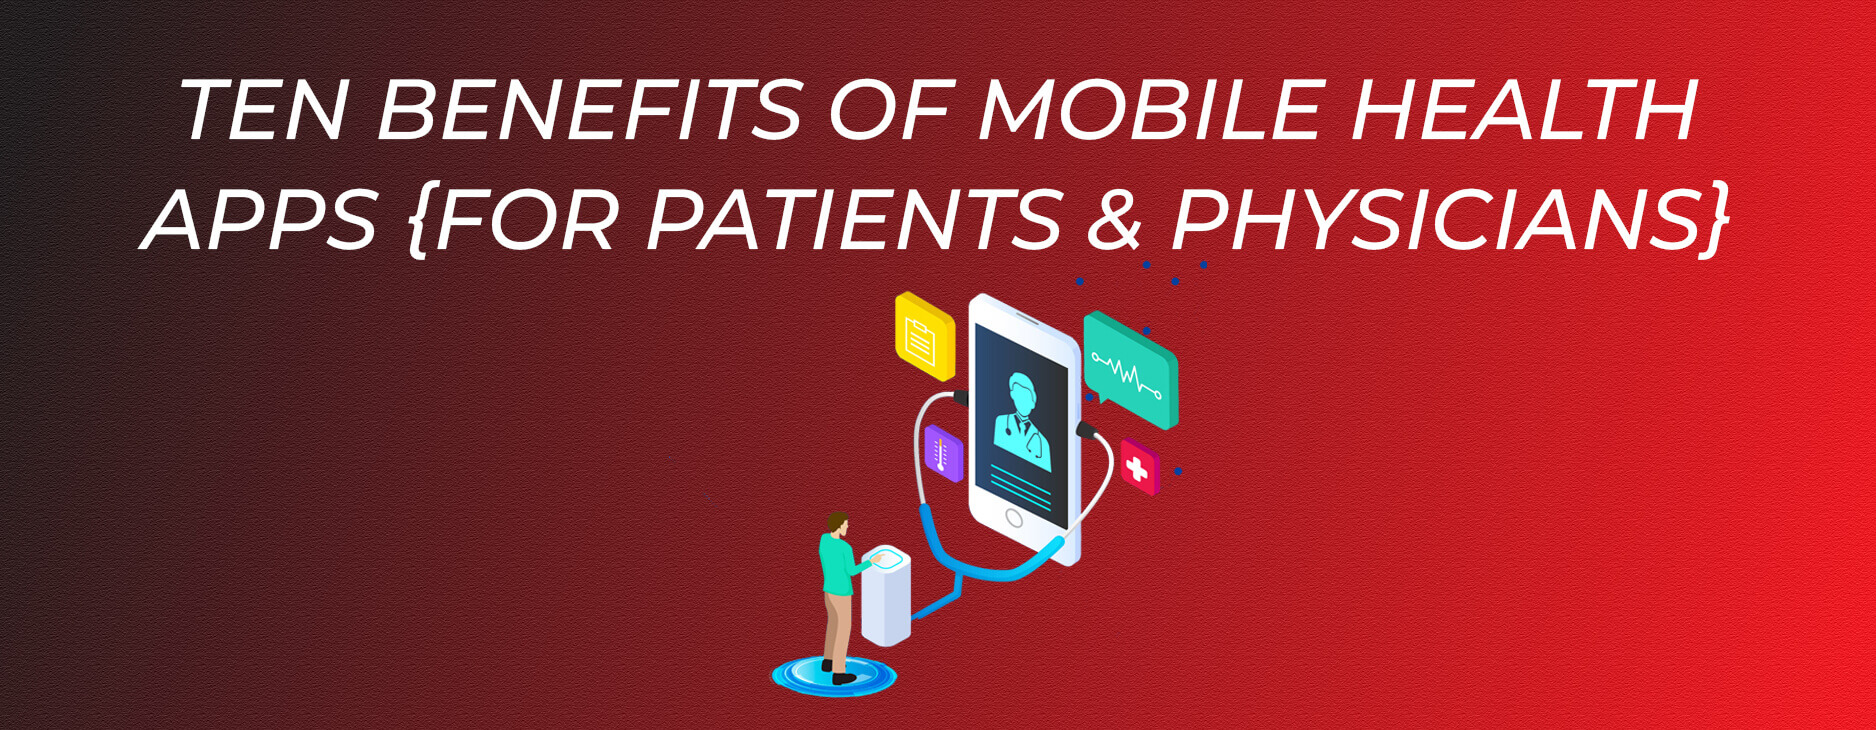 Mobile Health Apps